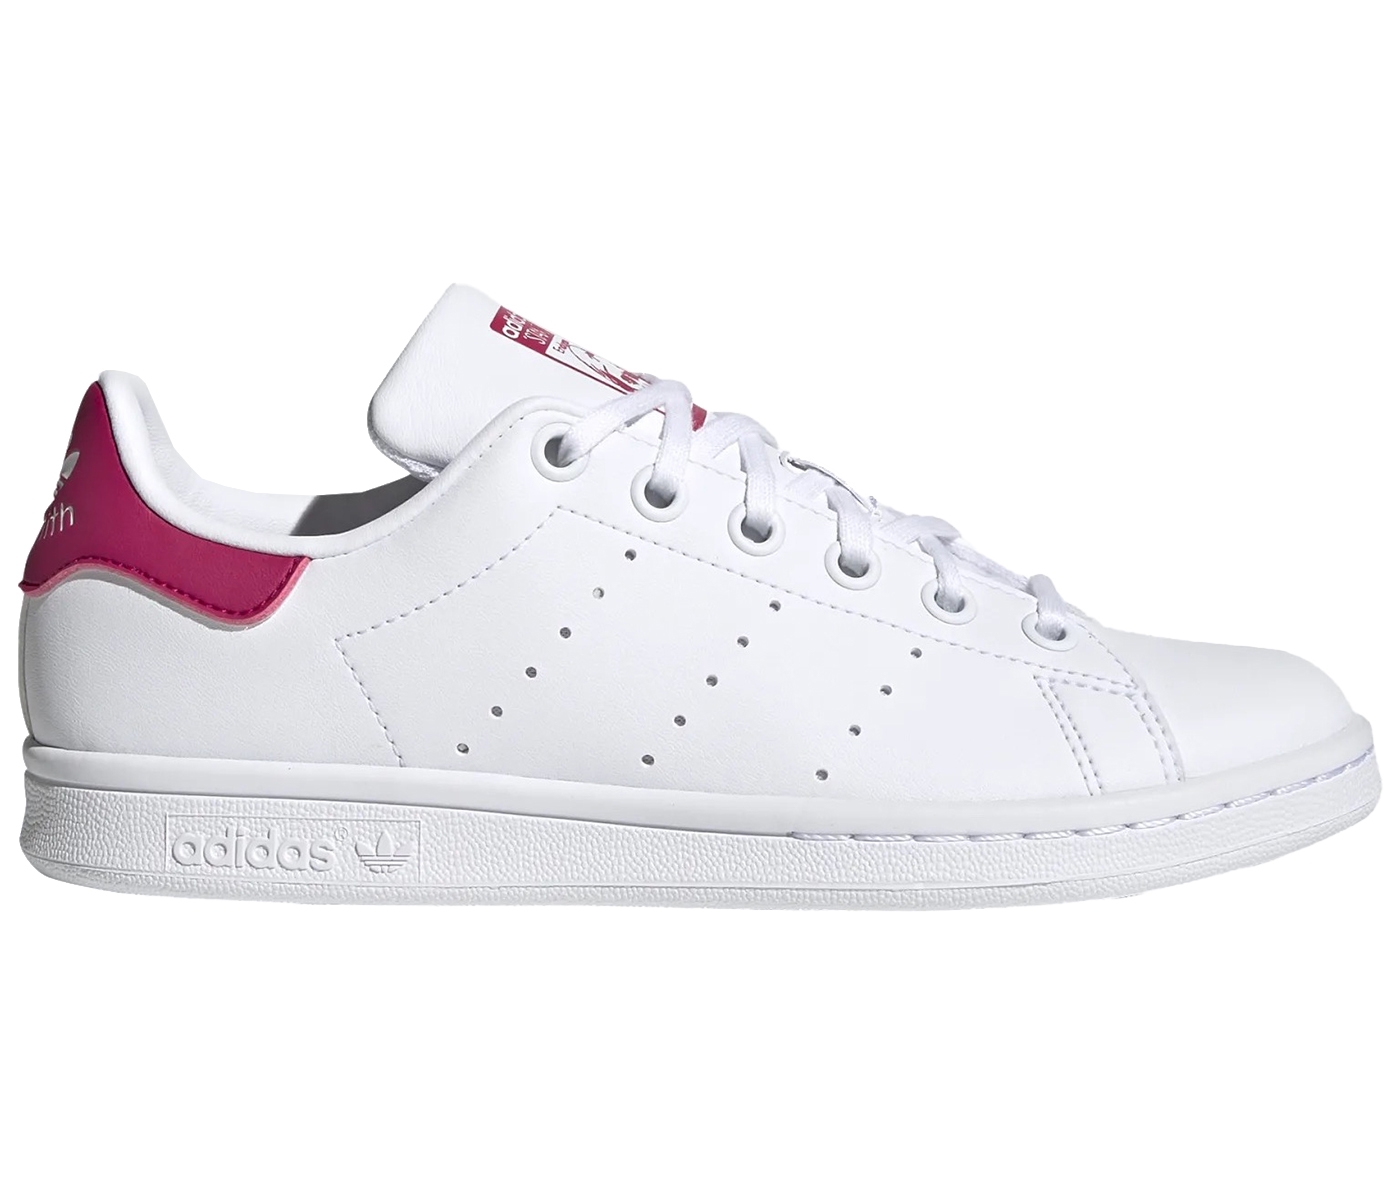 adidas Stan Smith Cloud White Bold Pink (GS) キッズ - FX7522 - JP